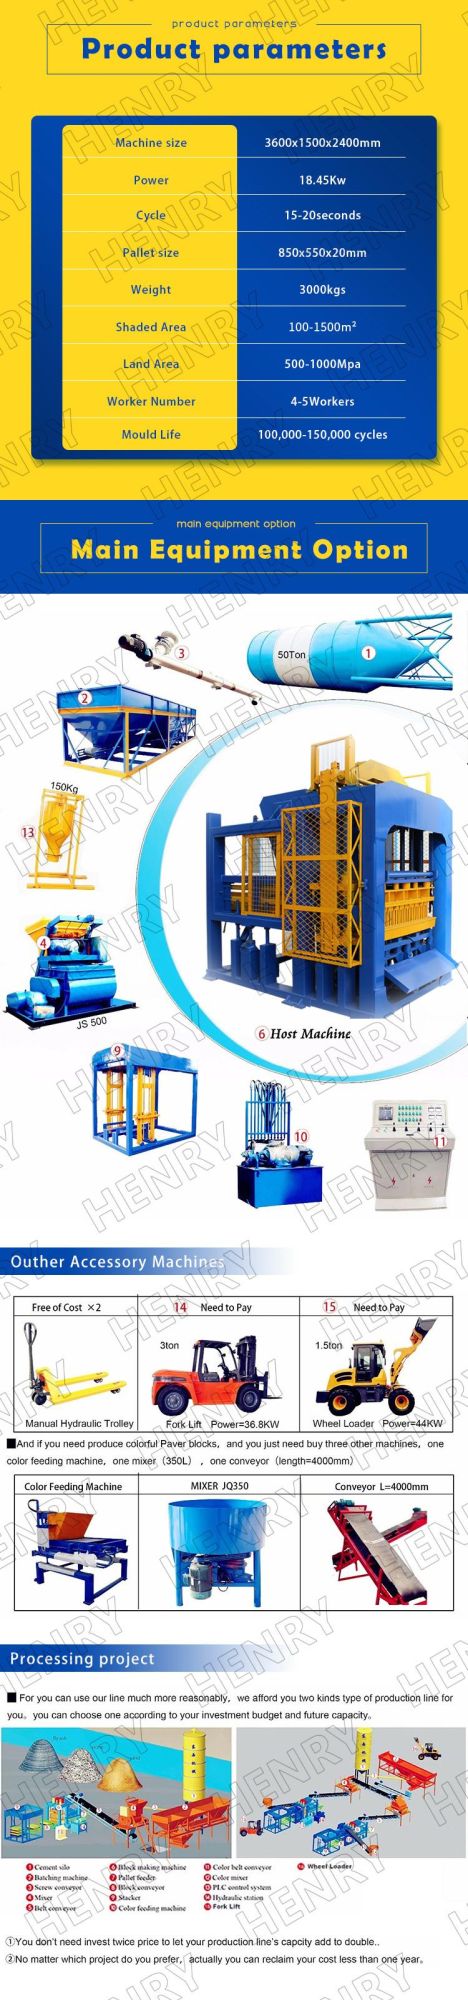 5% Factory Recommended Qt4-18 Hydraulic Fully Automatic Concrete Block Colorful Paver Making Machine, Concrete Brick Making Machine Agent Price